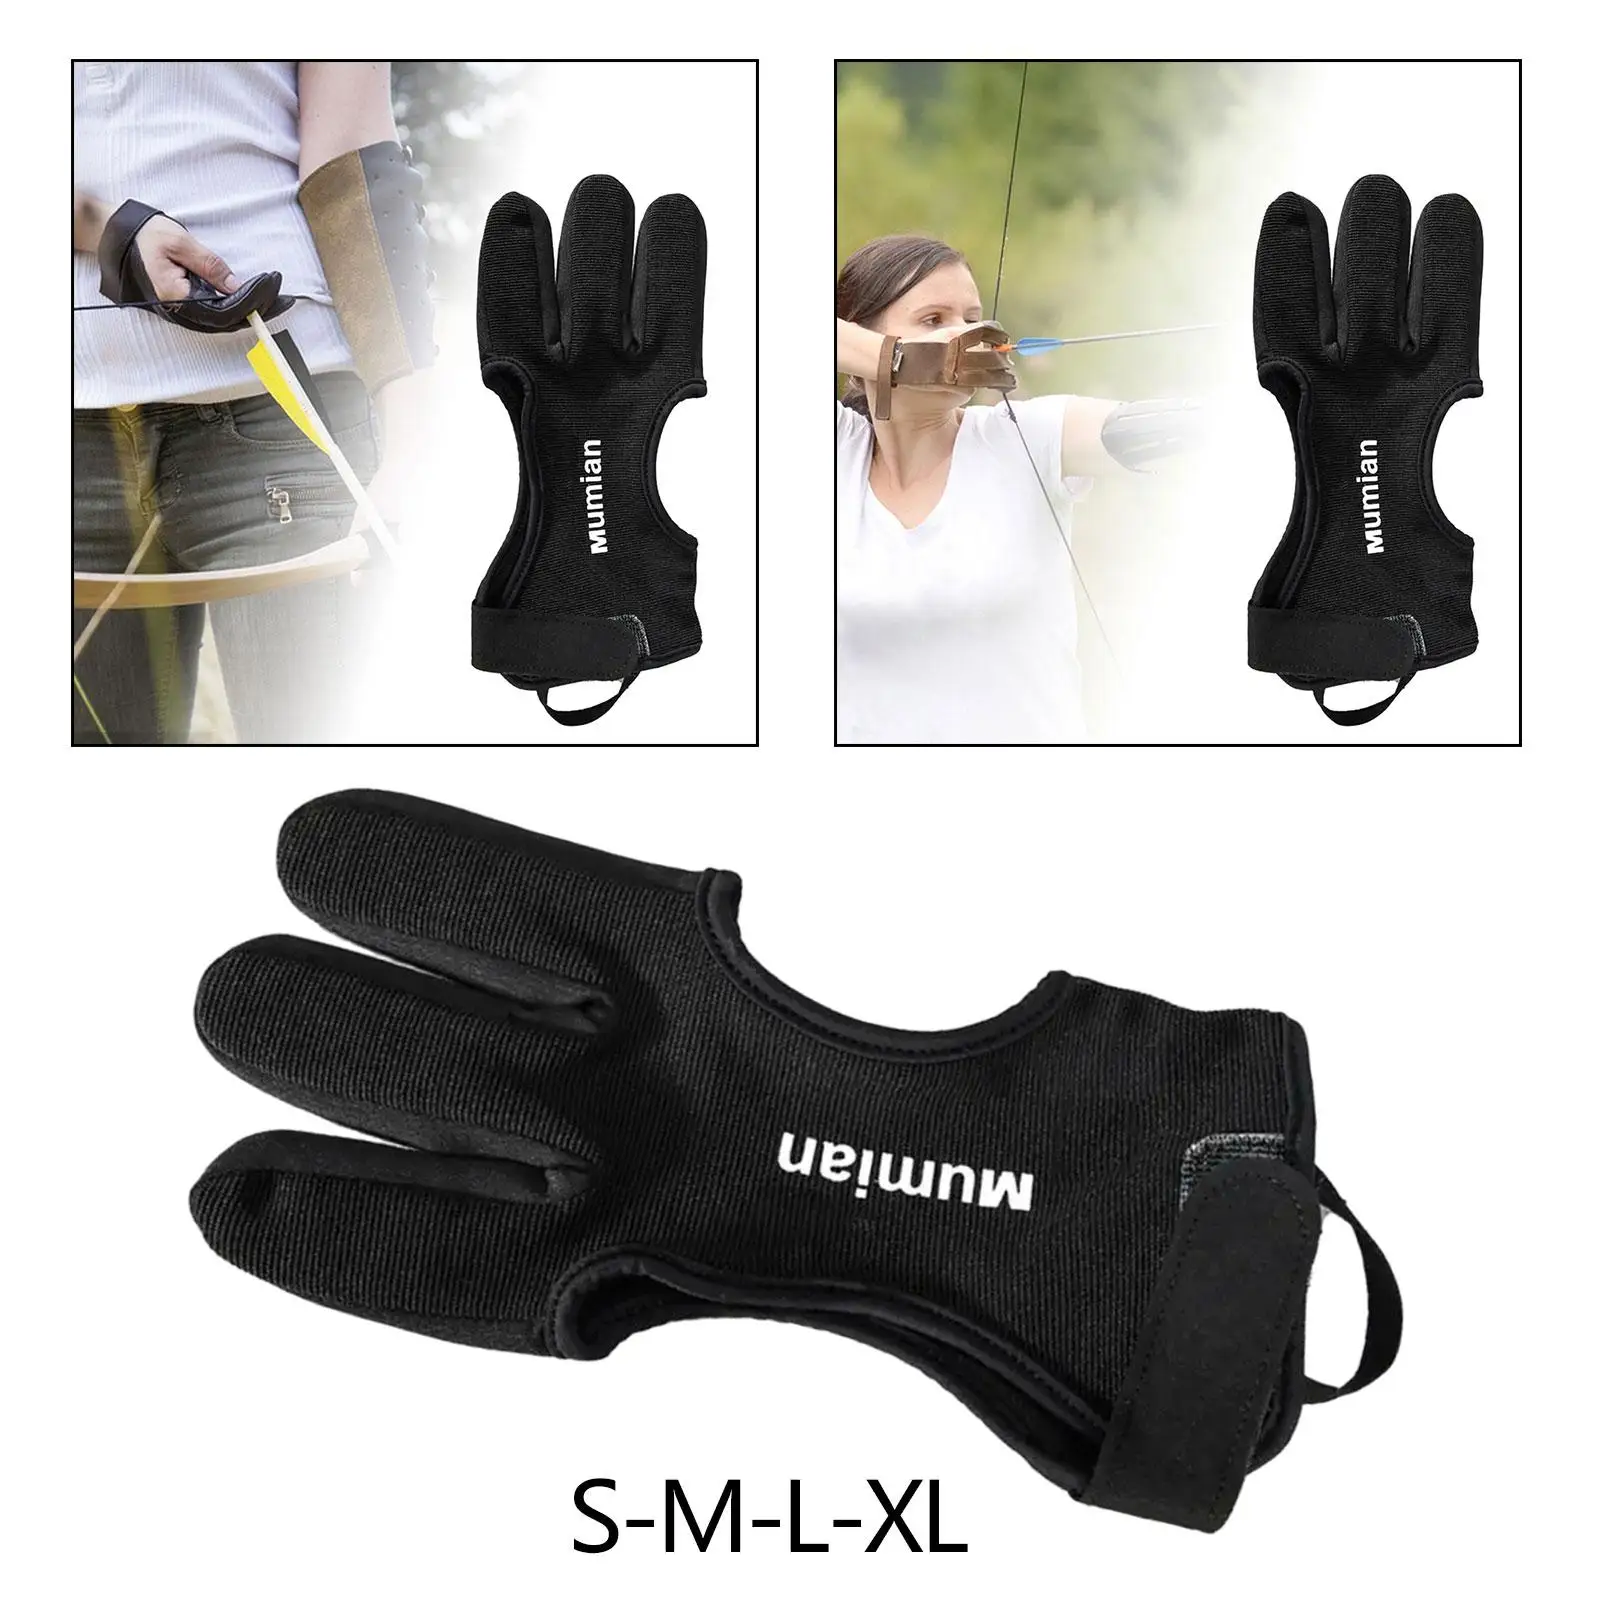 Archery Glove for Left and Right Hand Archery Accessories Archery Finger Guard for Beginner Adult Men Women Archery Practice